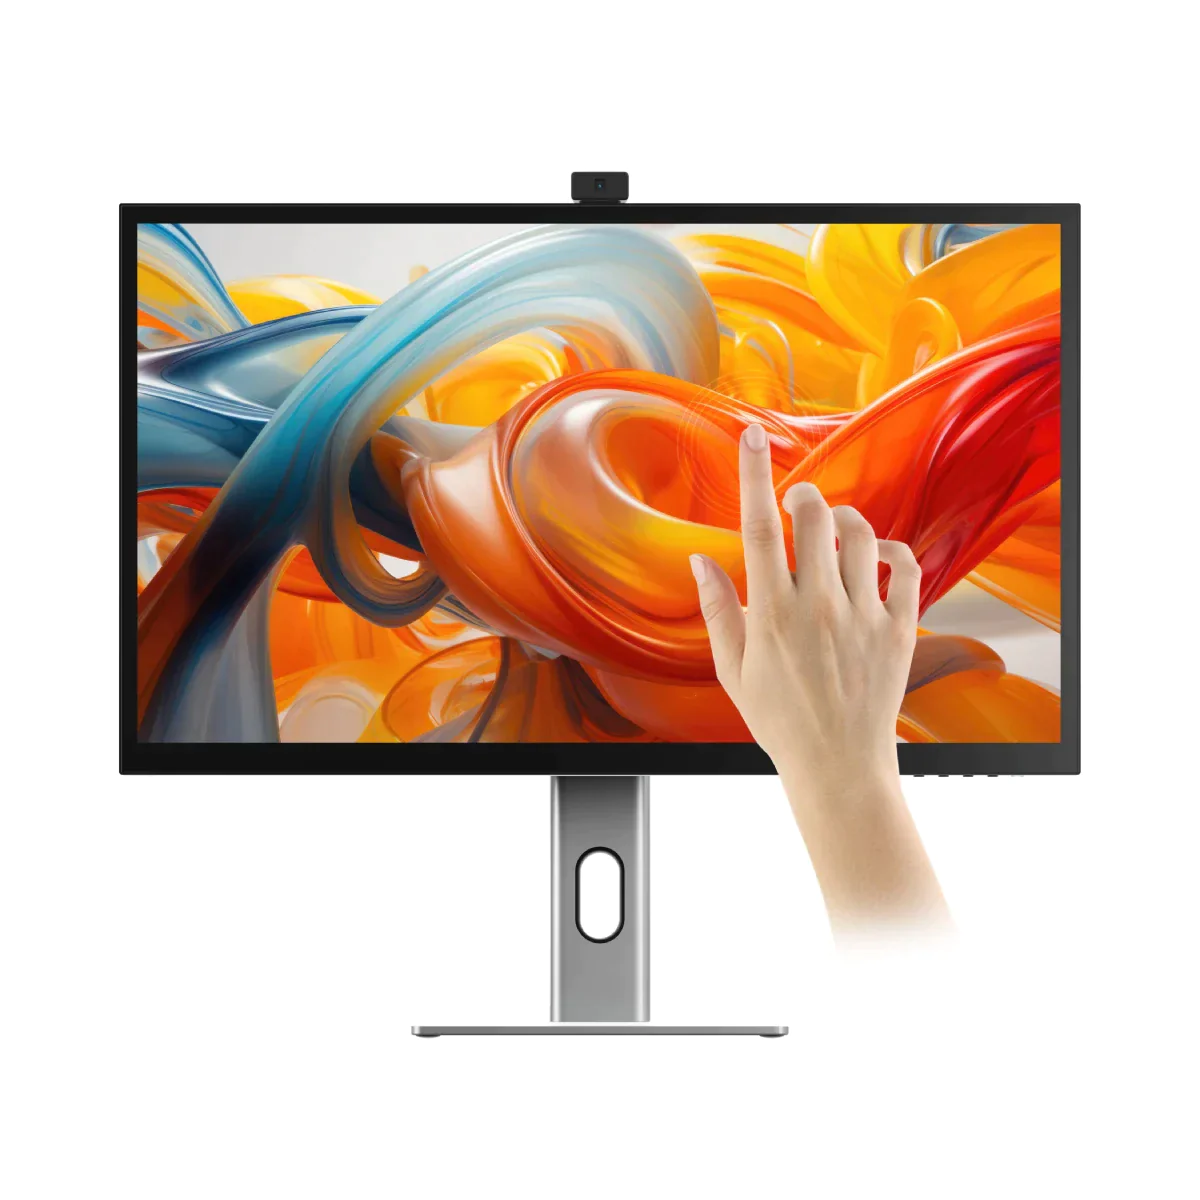 CLARITY 27" UHD 4K Monitor + Clarity Pro Touch 27" UHD 4K Monitor with 65W PD, Webcam and Touchscreen + Dual 4K Universal Docking Station “ HDMI Edition